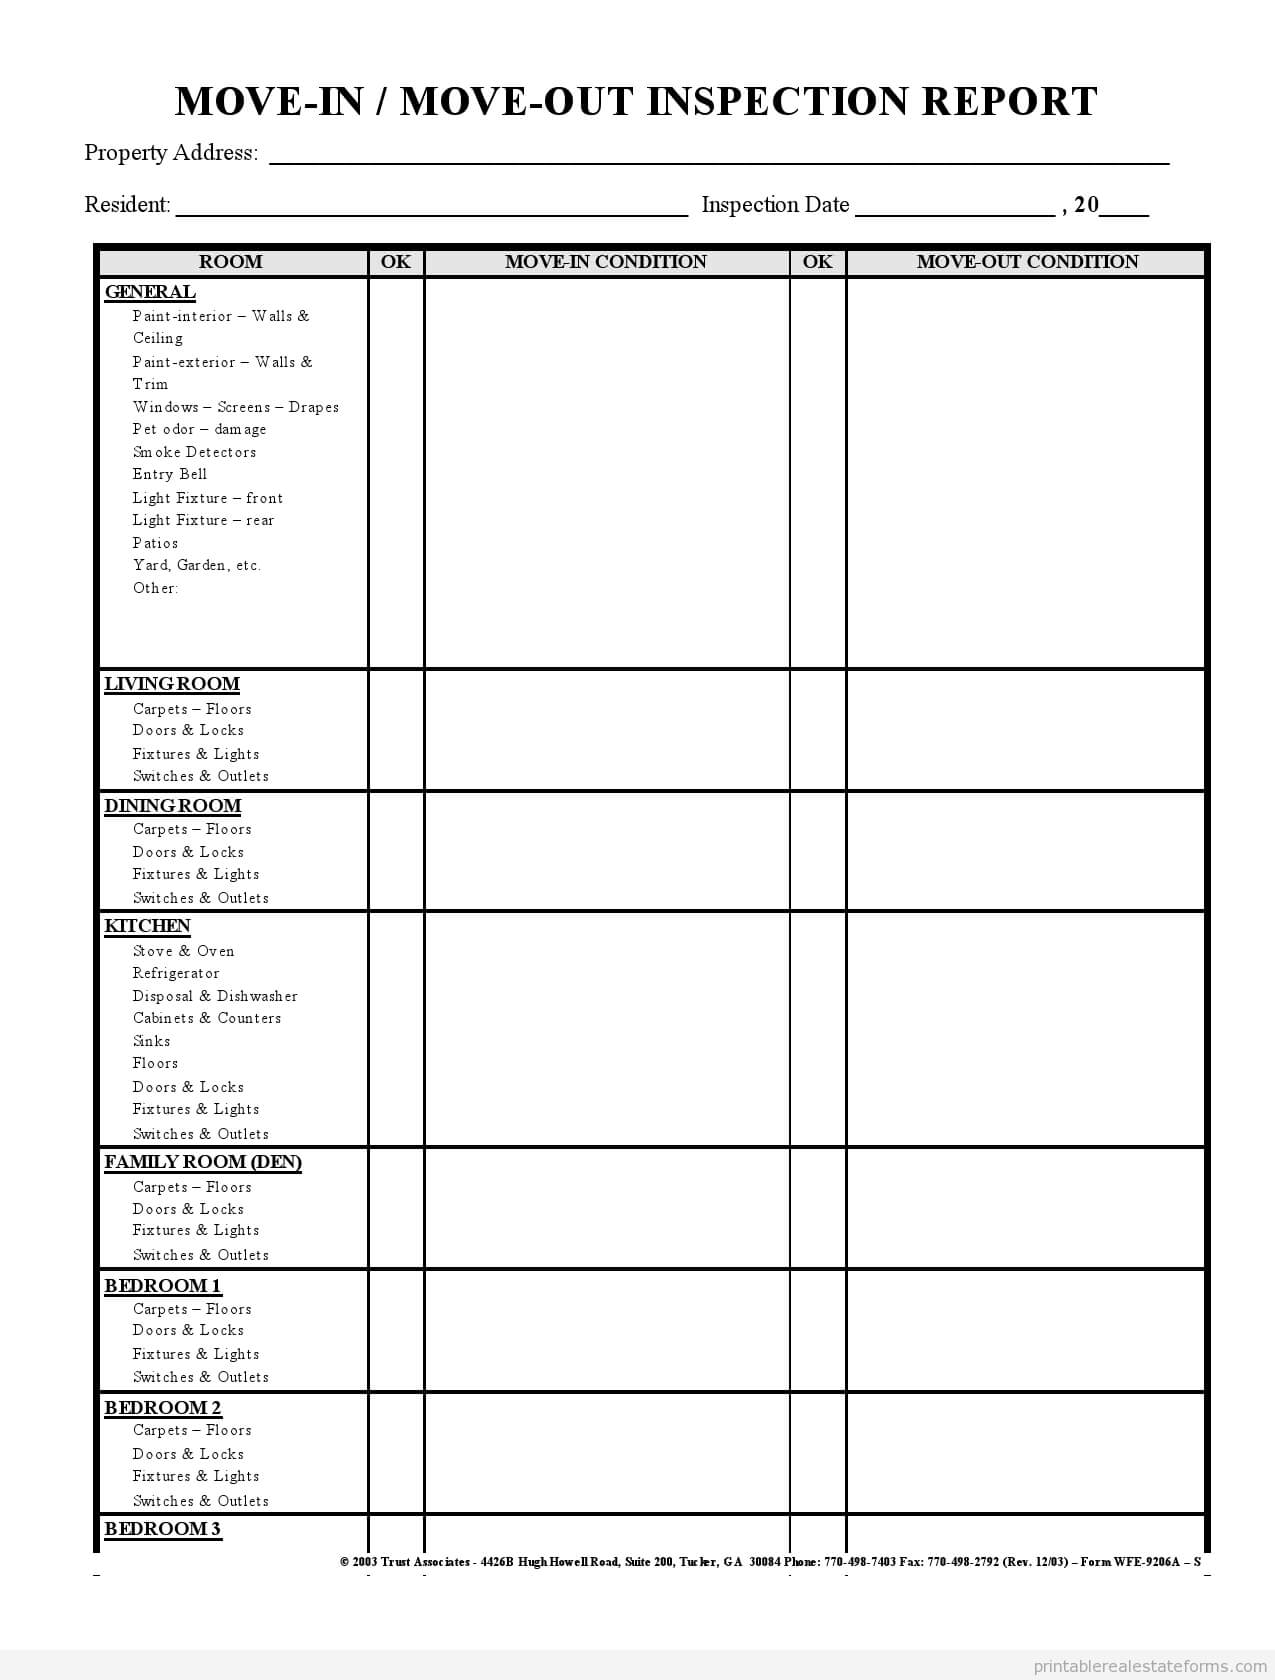 Sample Printable Move In Move Out Inspection Report Form Within Property Management Inspection Report Template